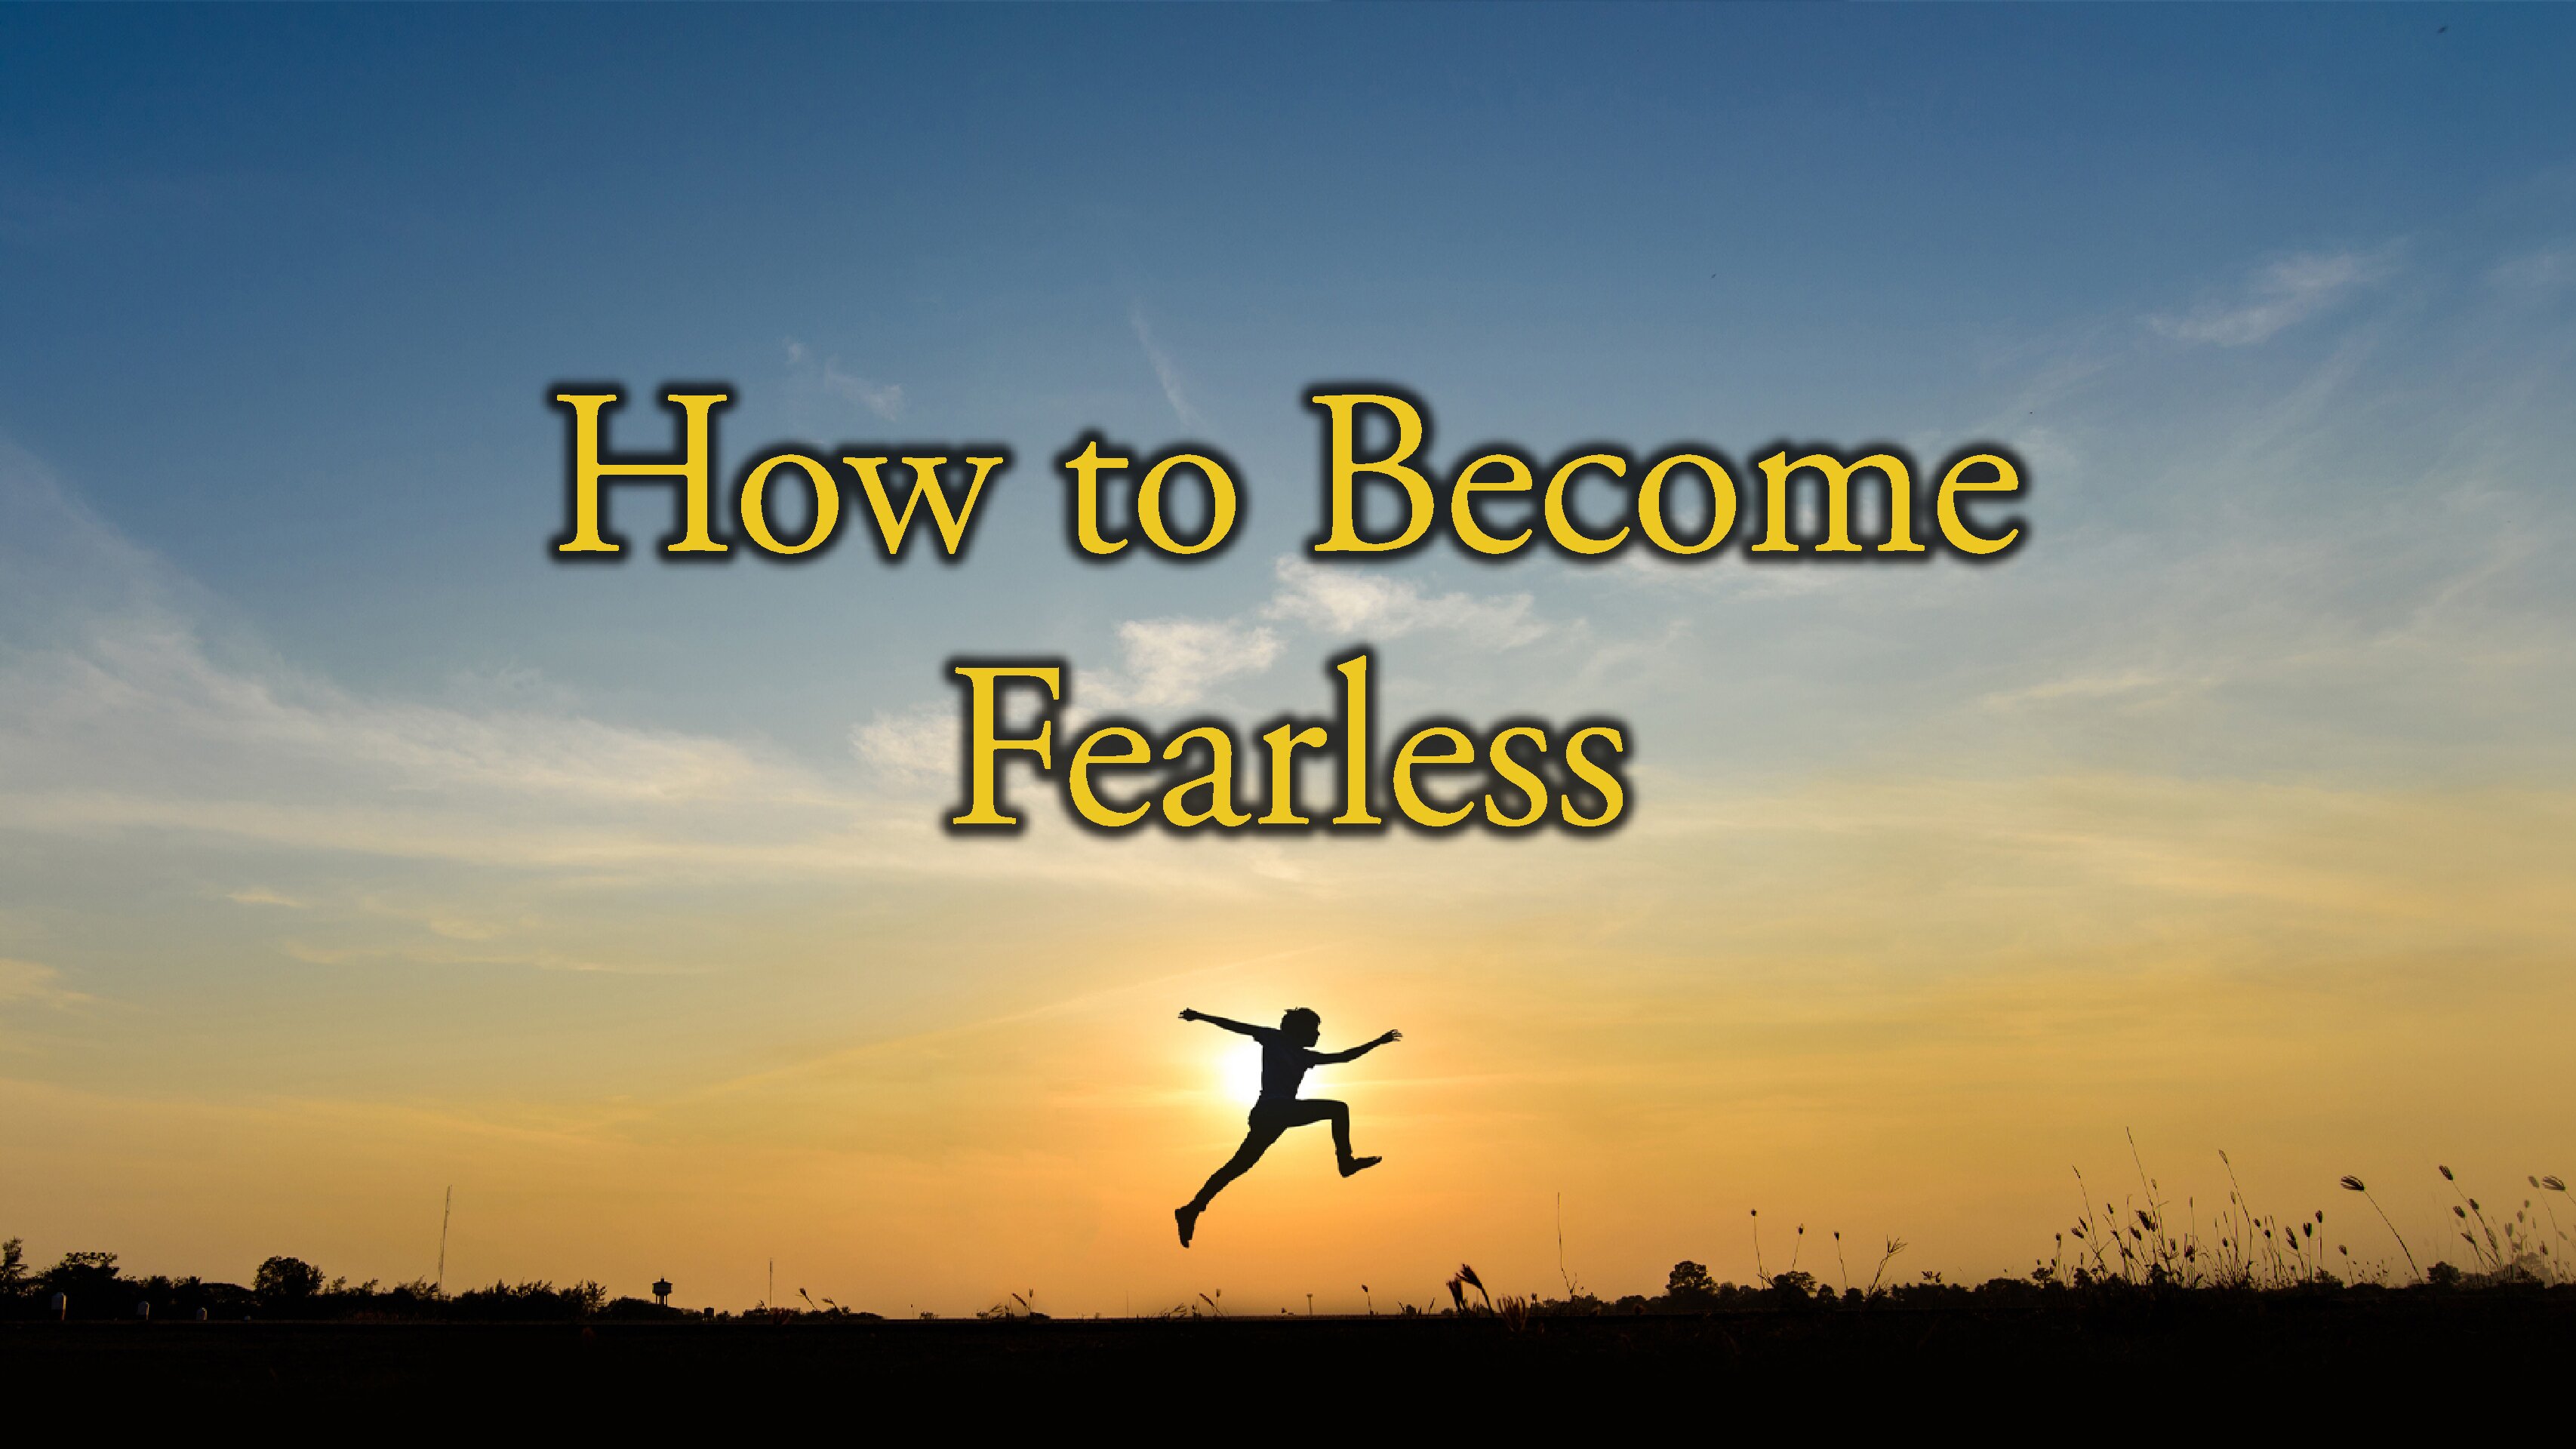 How to Become Fearless